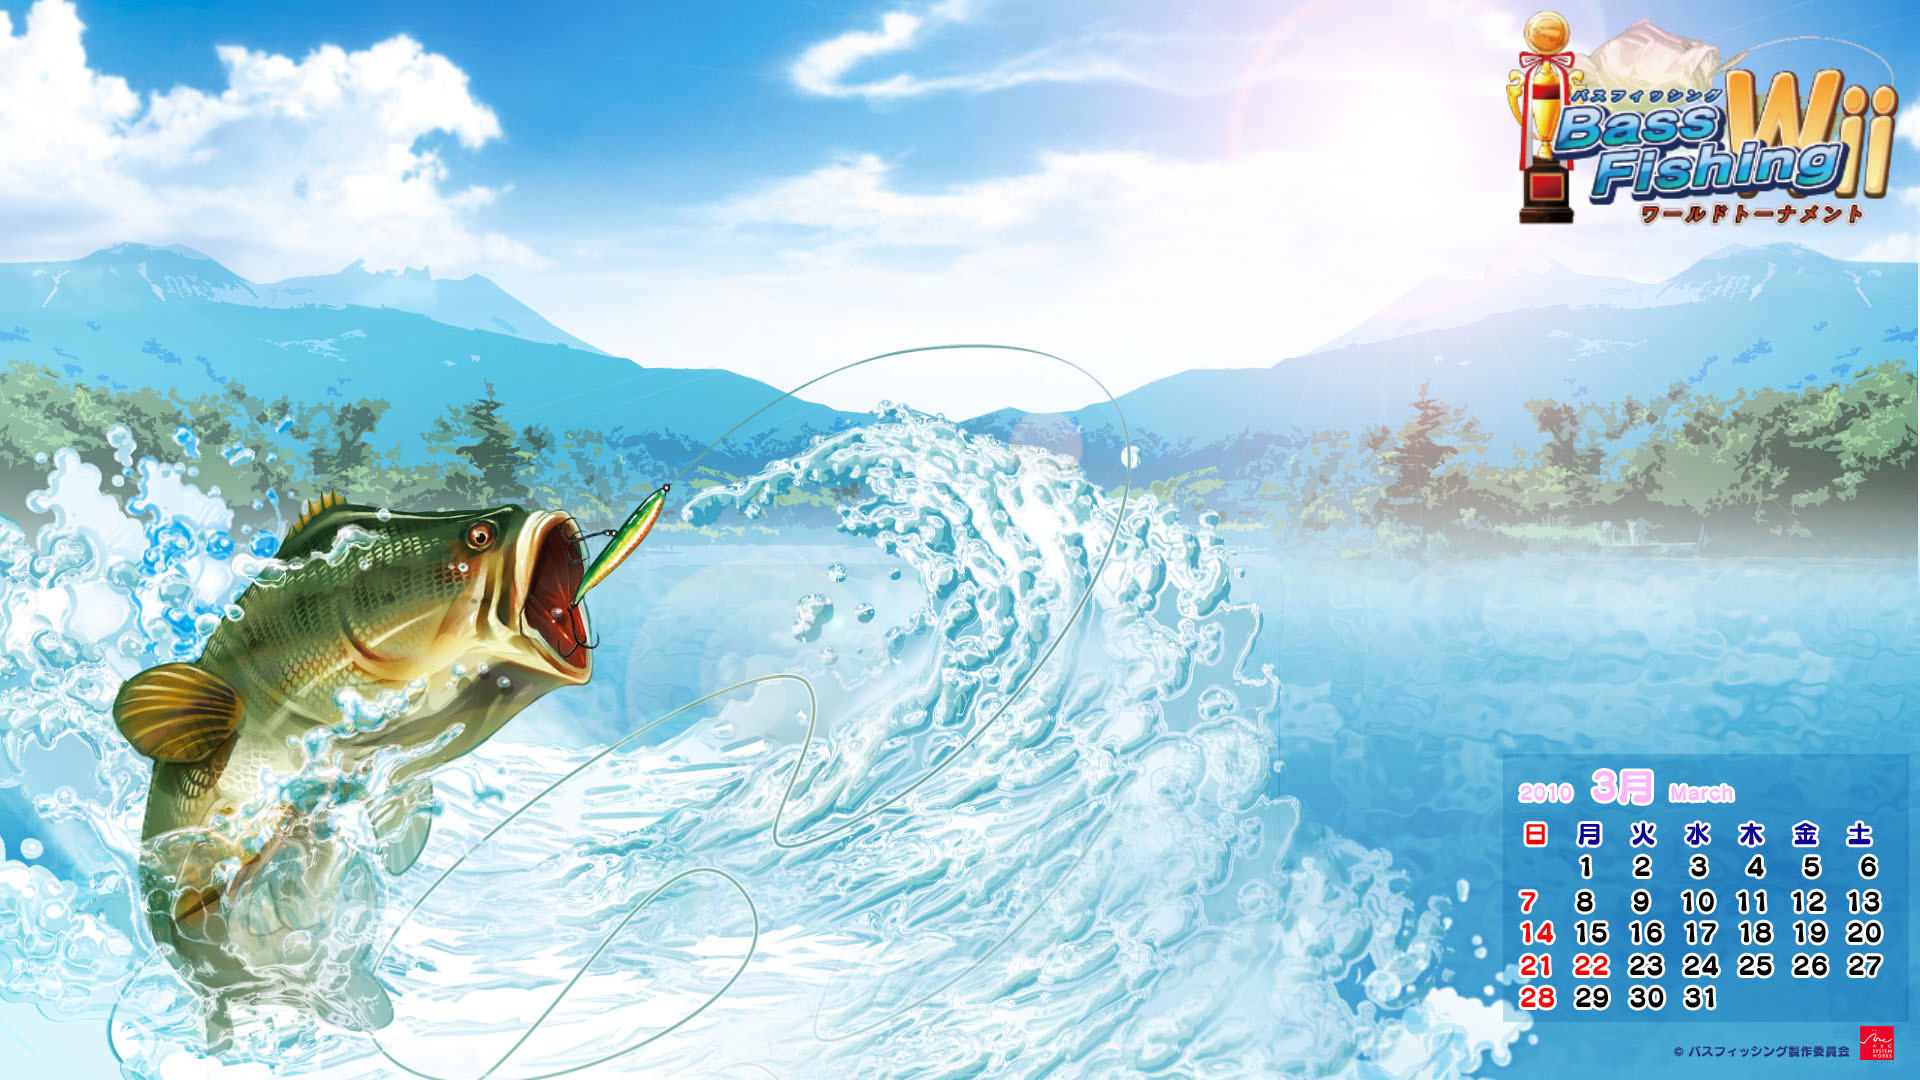 Bass Fishing Wallpaper HD 1920 X 1080 Learn how to catch any kind of fish with